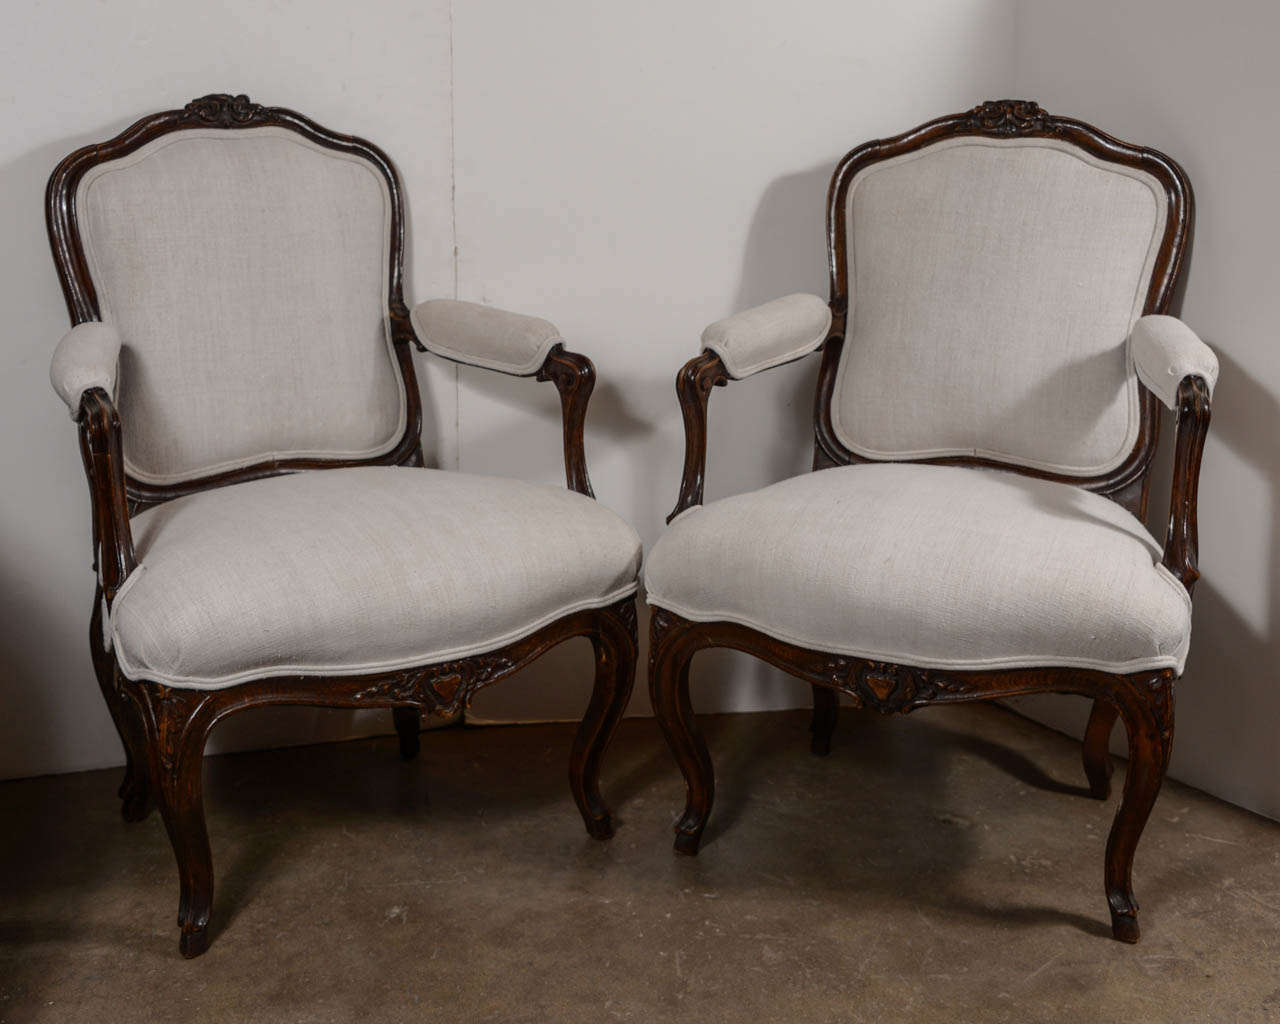 Pair of 18th century Louis XVI walnut chairs with newly upholstered antique linen.